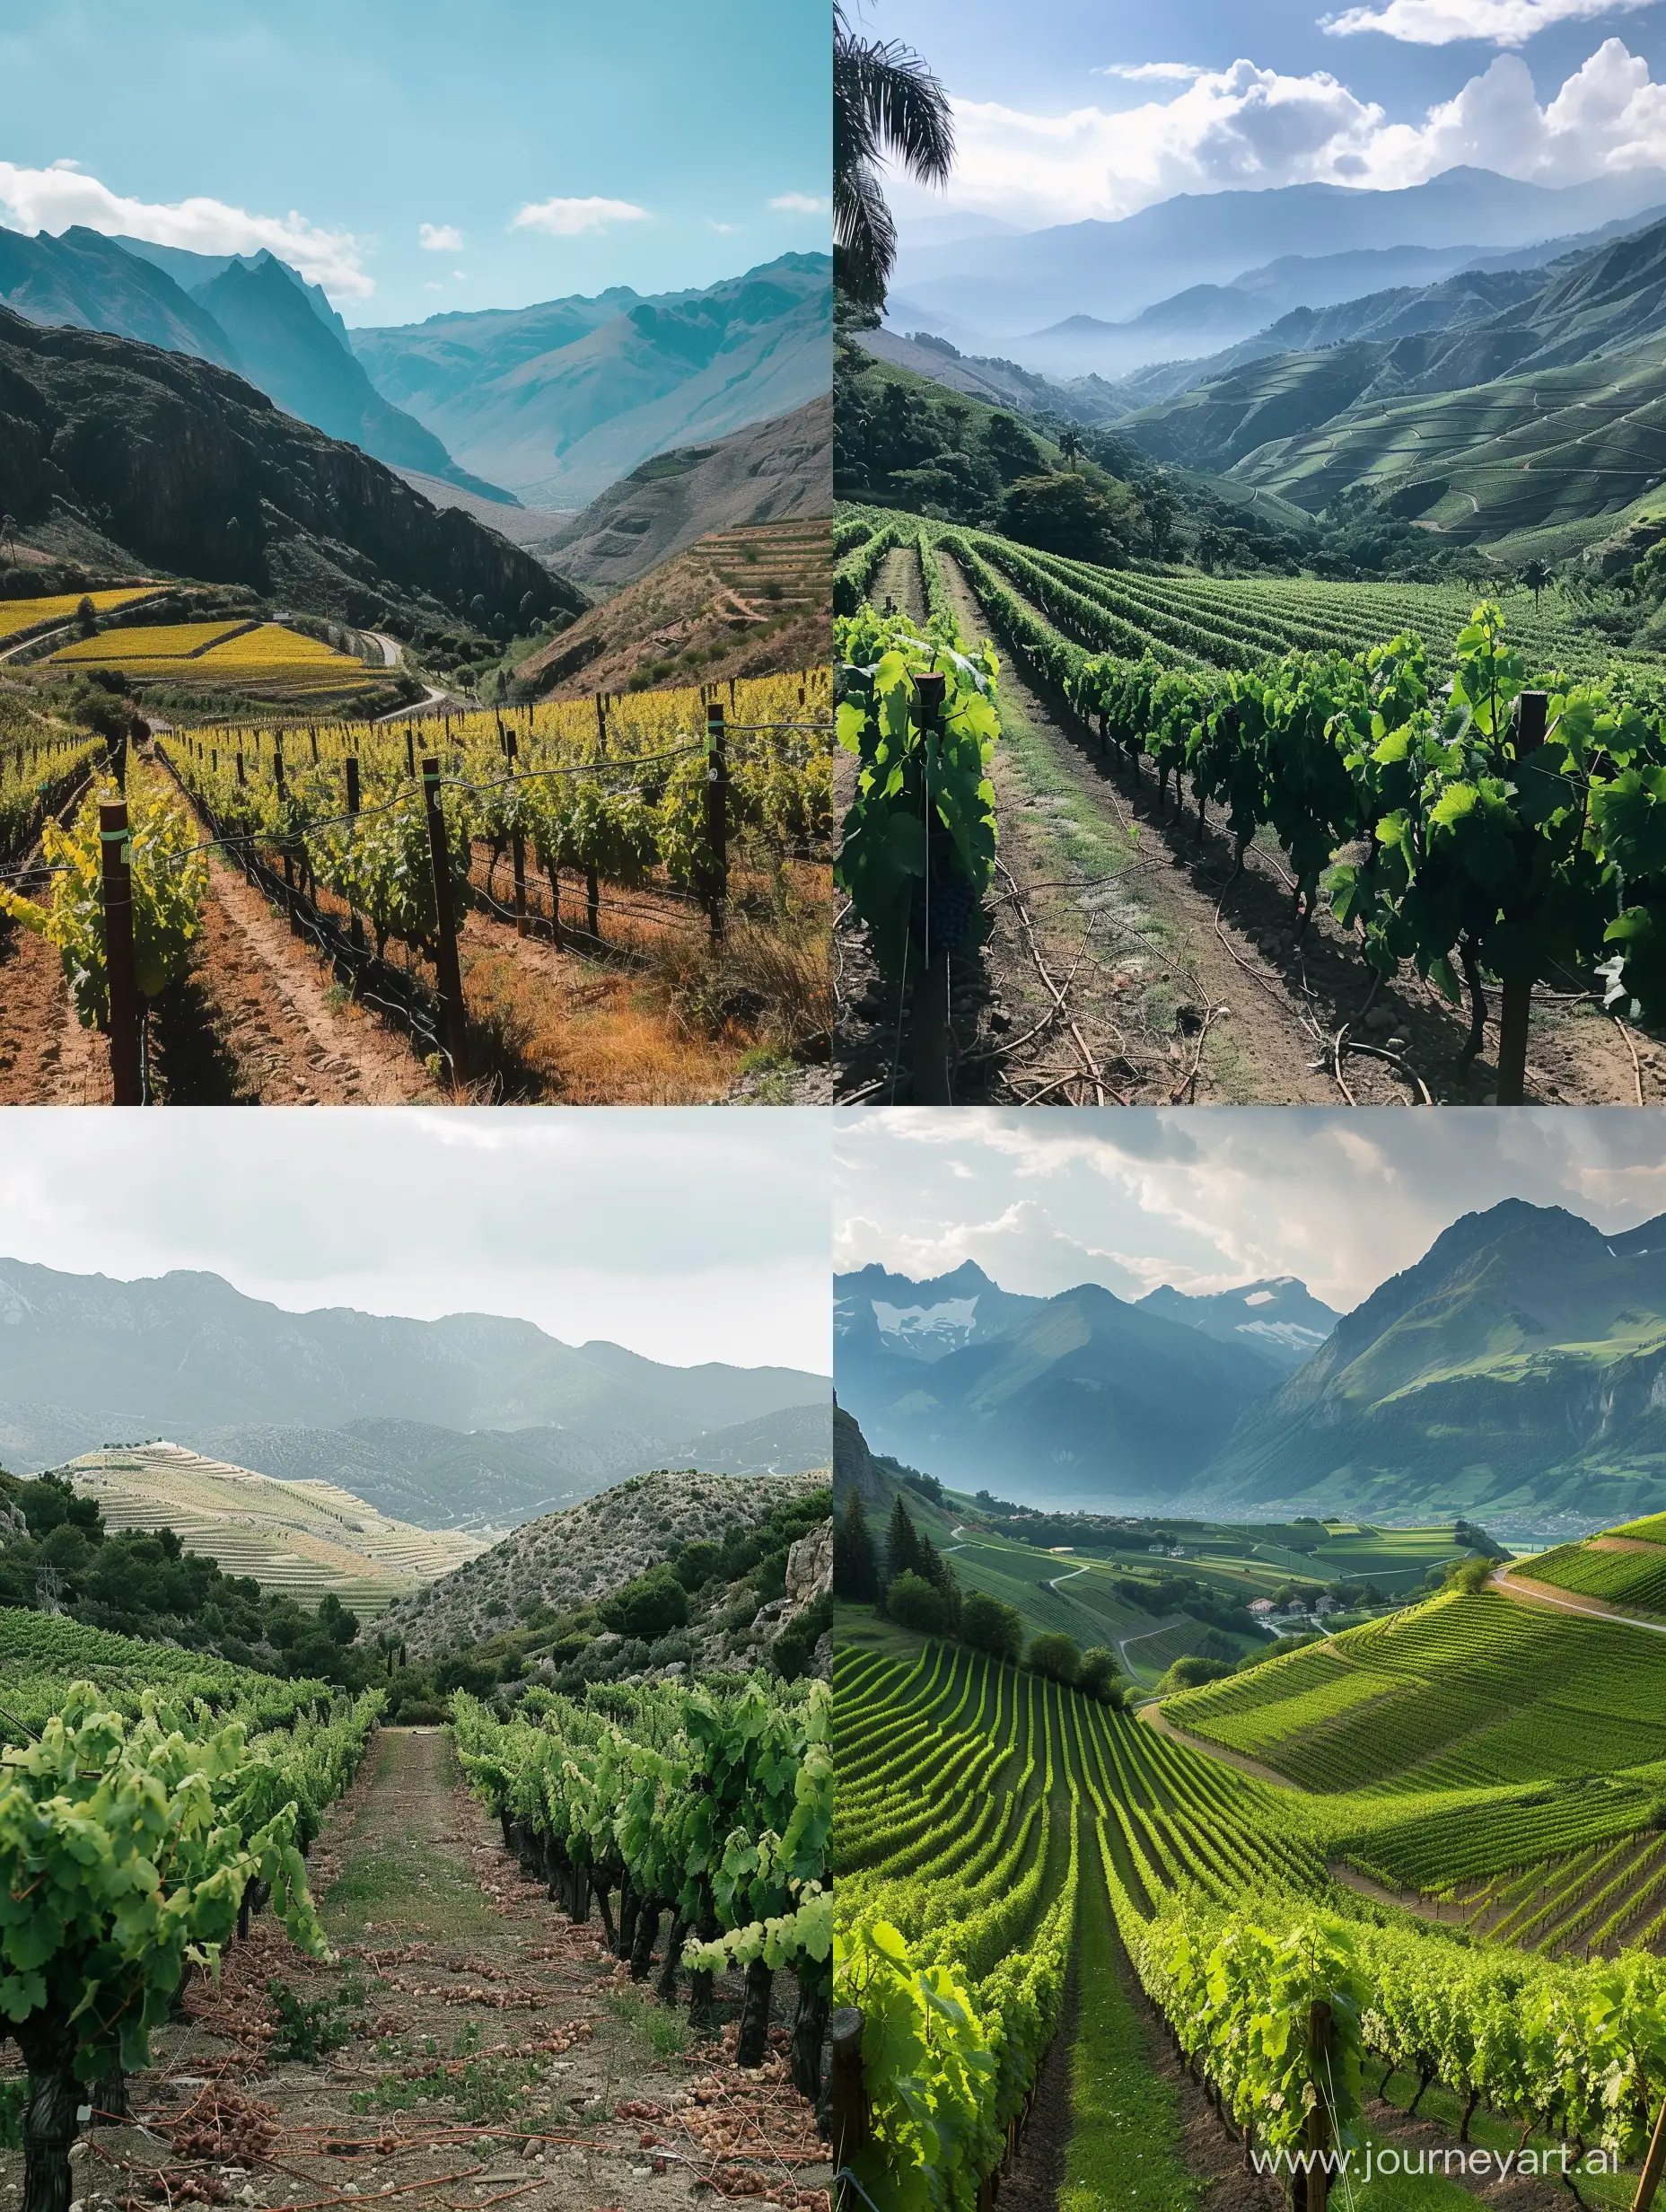 Serene-Mountain-Vineyards-Landscape-with-Rows-of-Vines